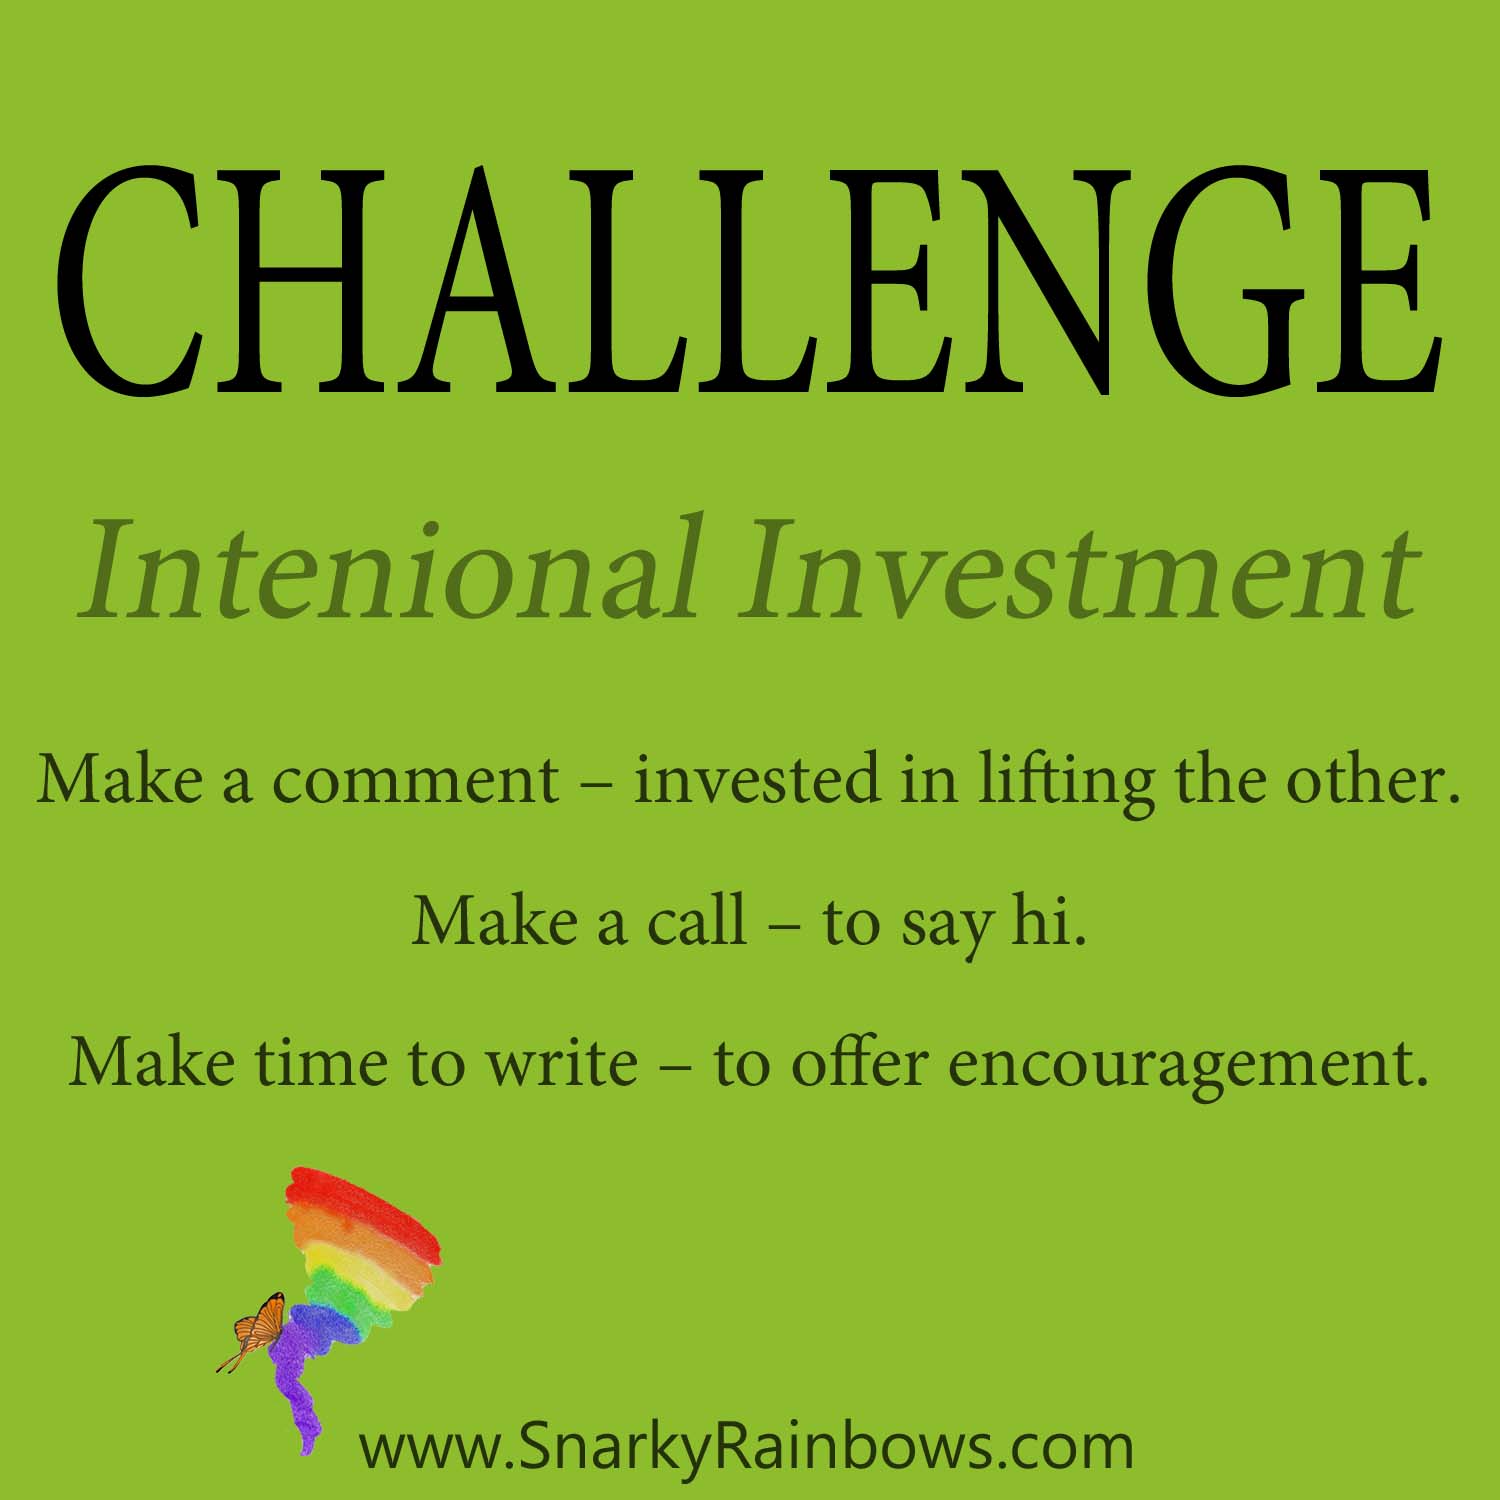 Daily Challenged - intentional investment